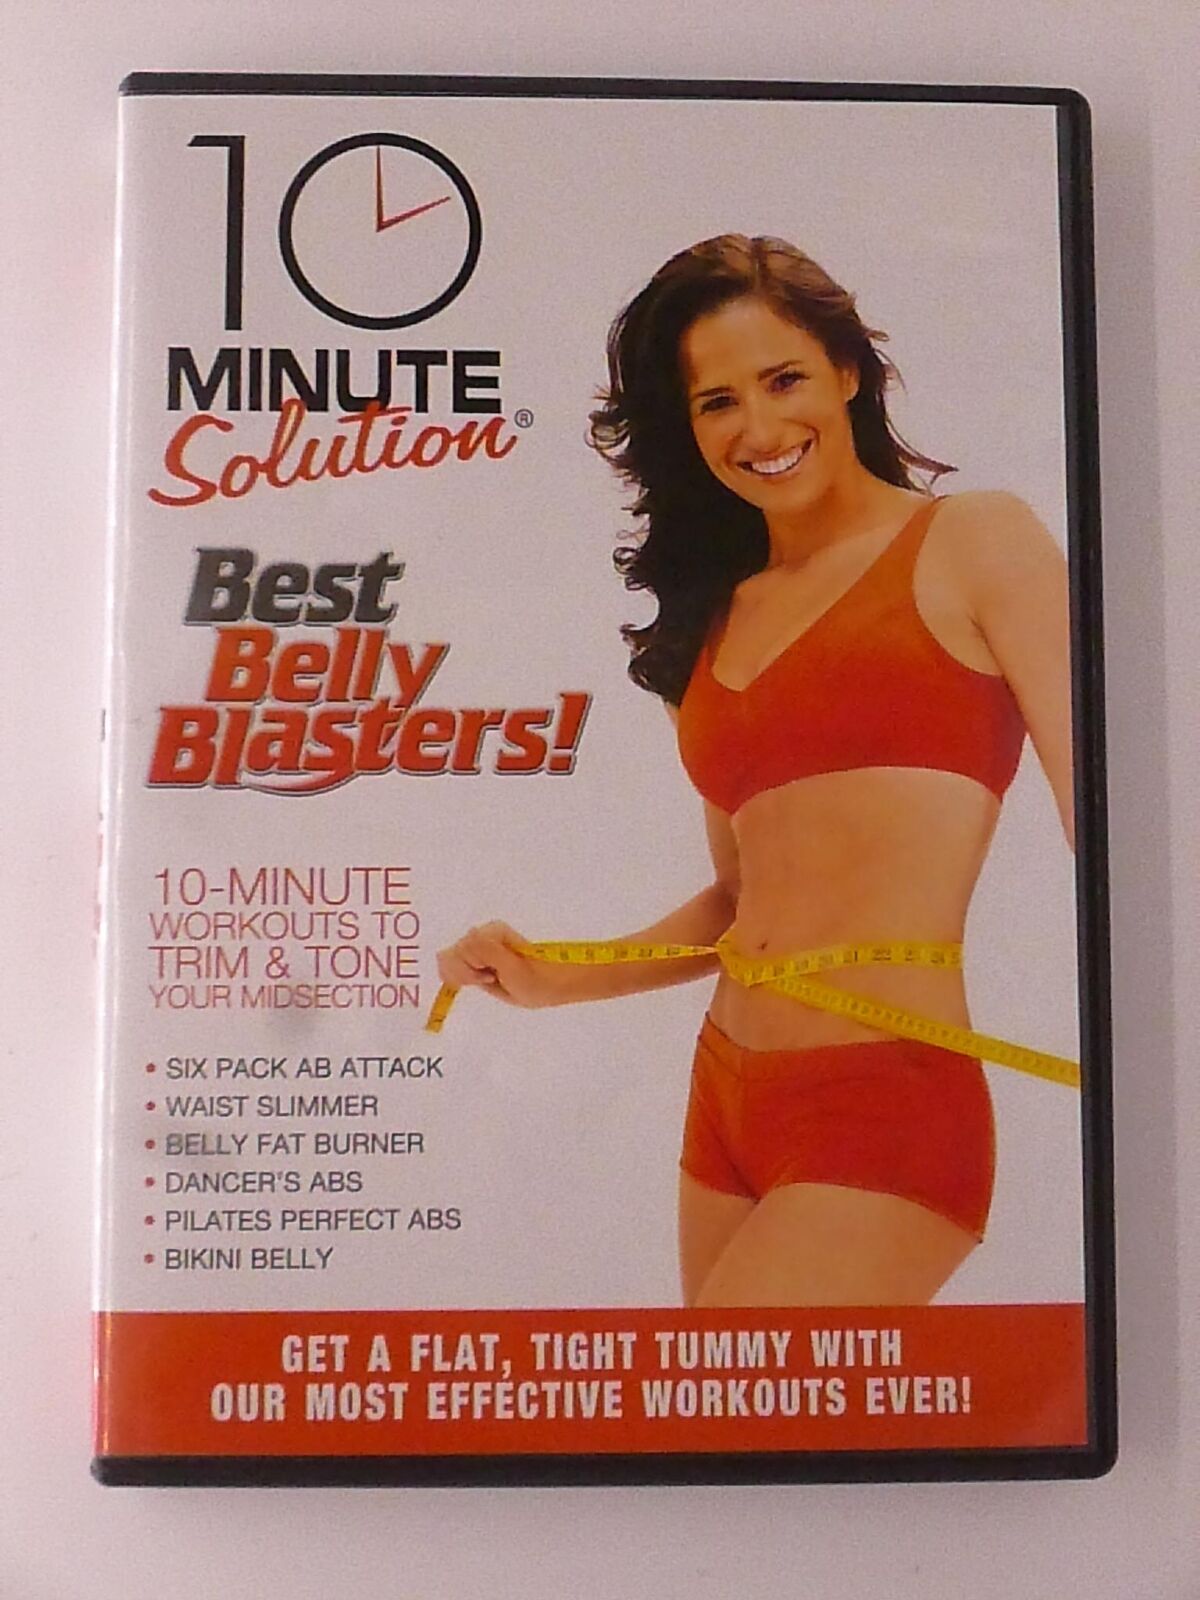 10 Minute Solution - Best Belly Blasters (DVD, exercise) - I0227